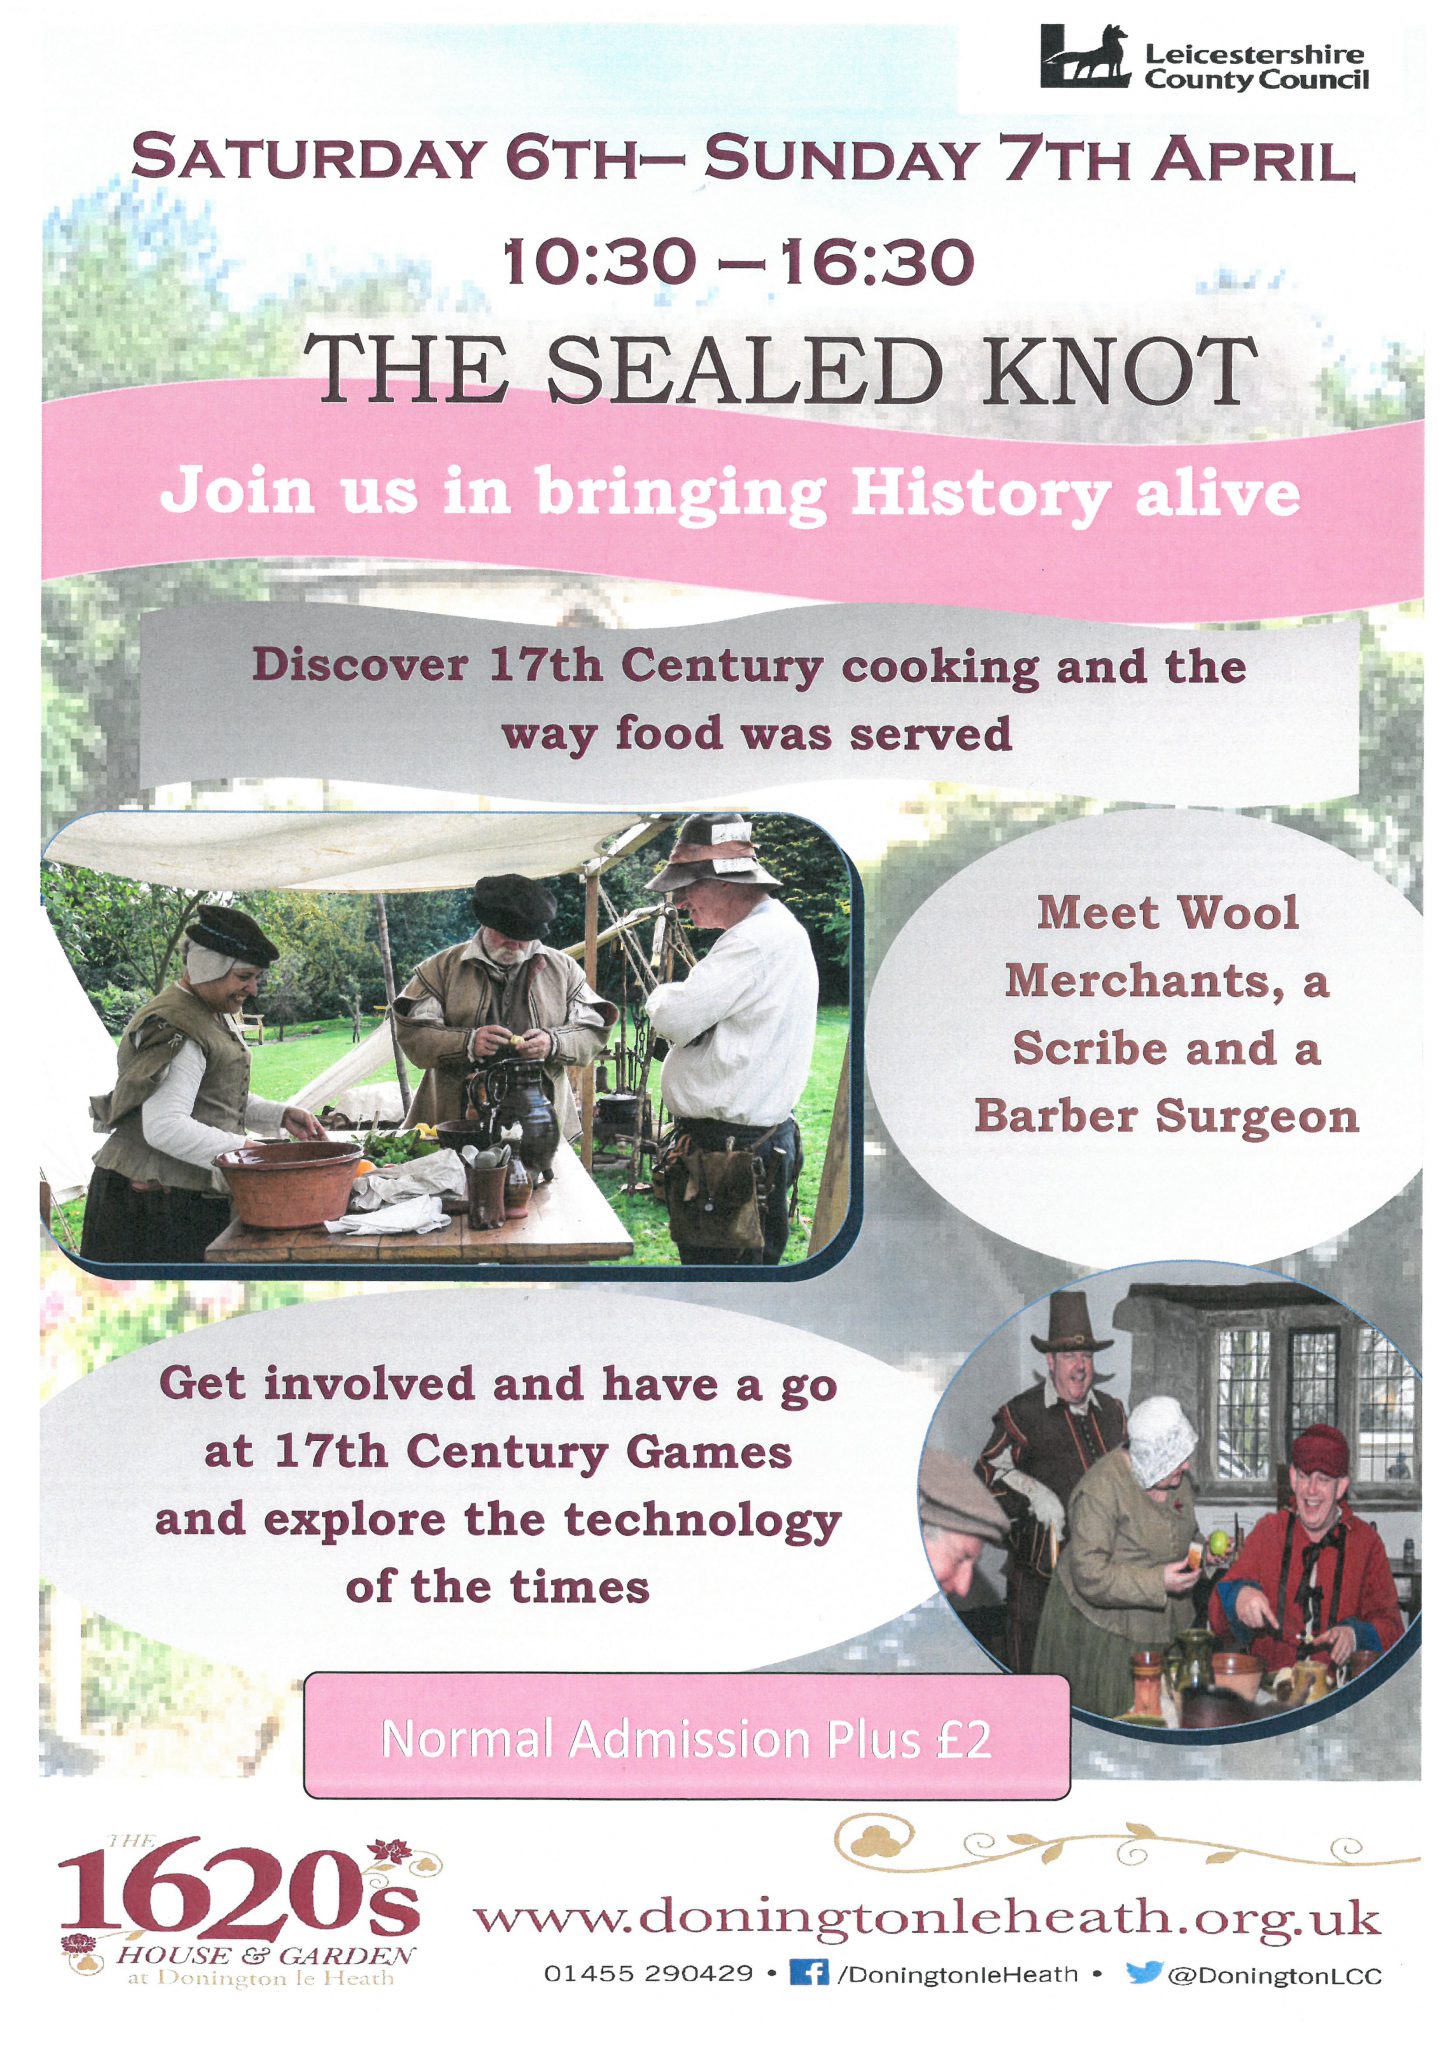 The Sealed Knot at The 1620s House & Garden